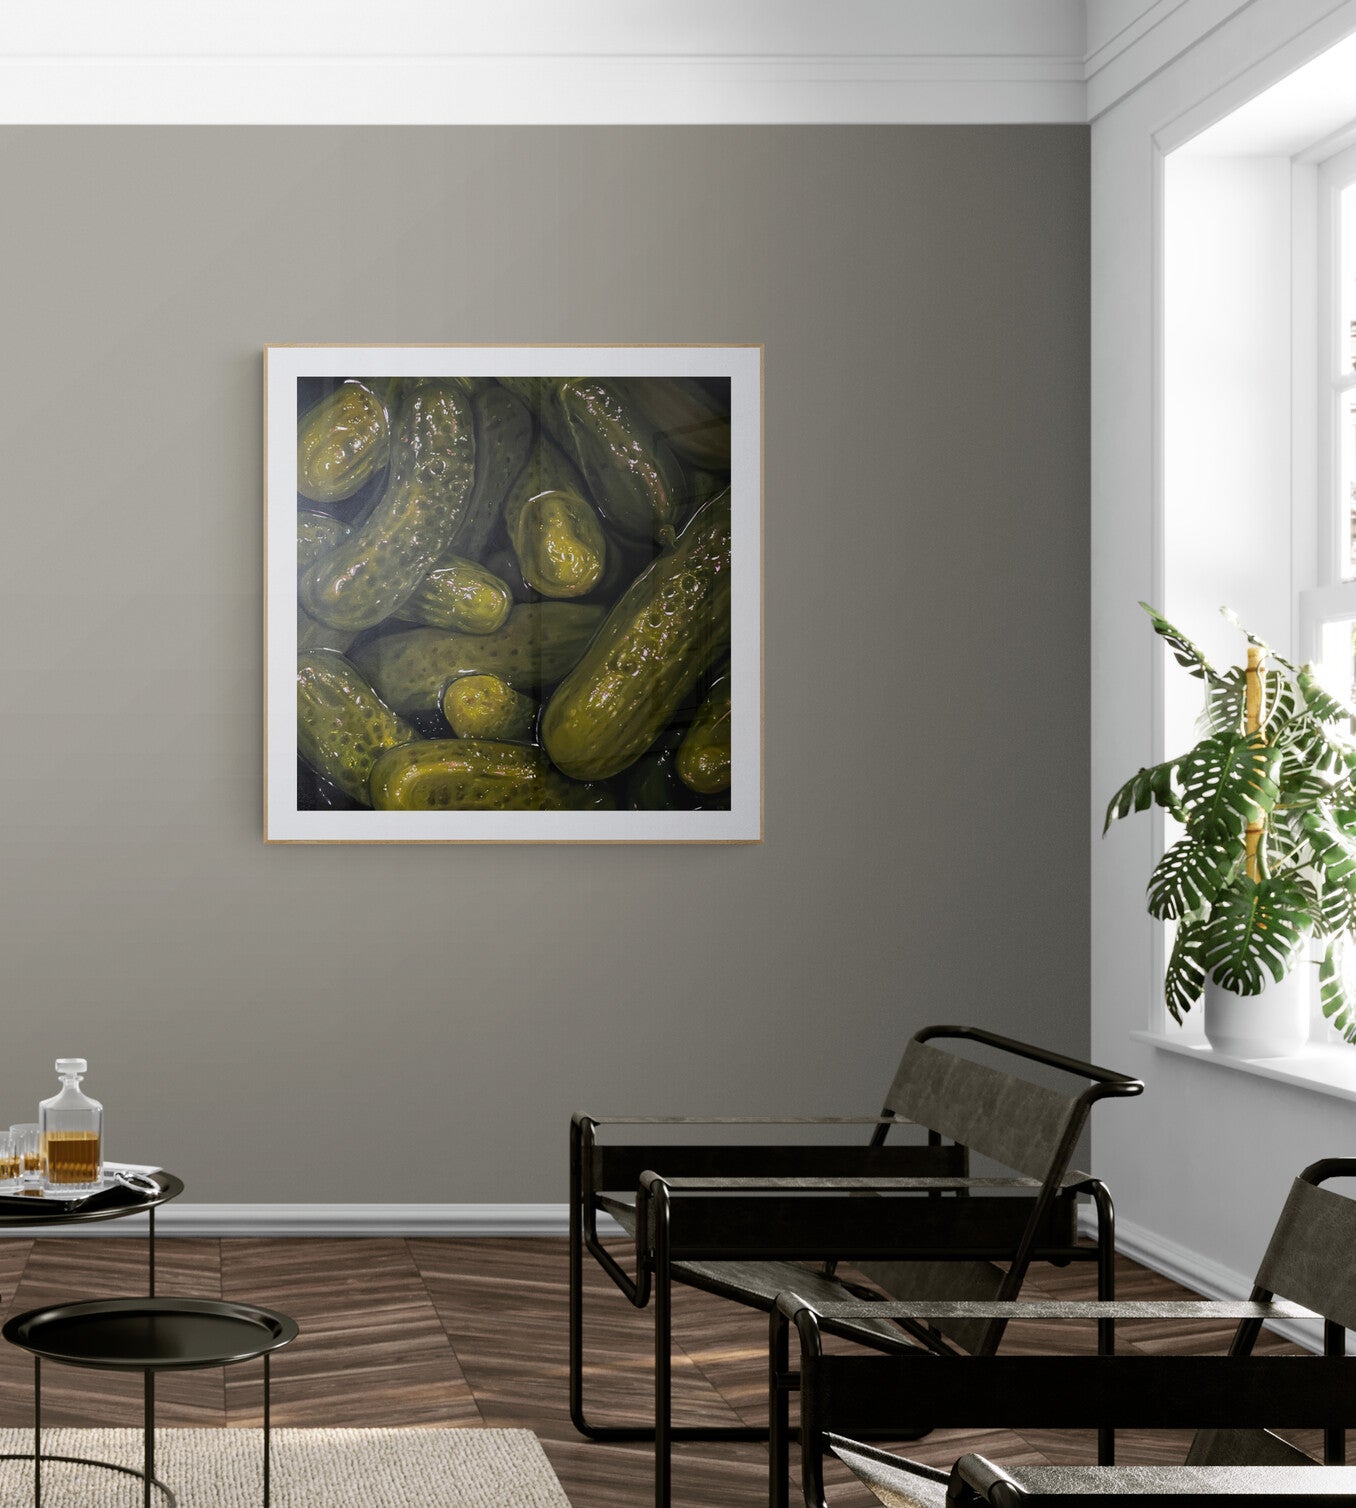 The original painting “Pickles" by Hannah Kilby from Hannah Michelle Studios, displayed as a fine art print.